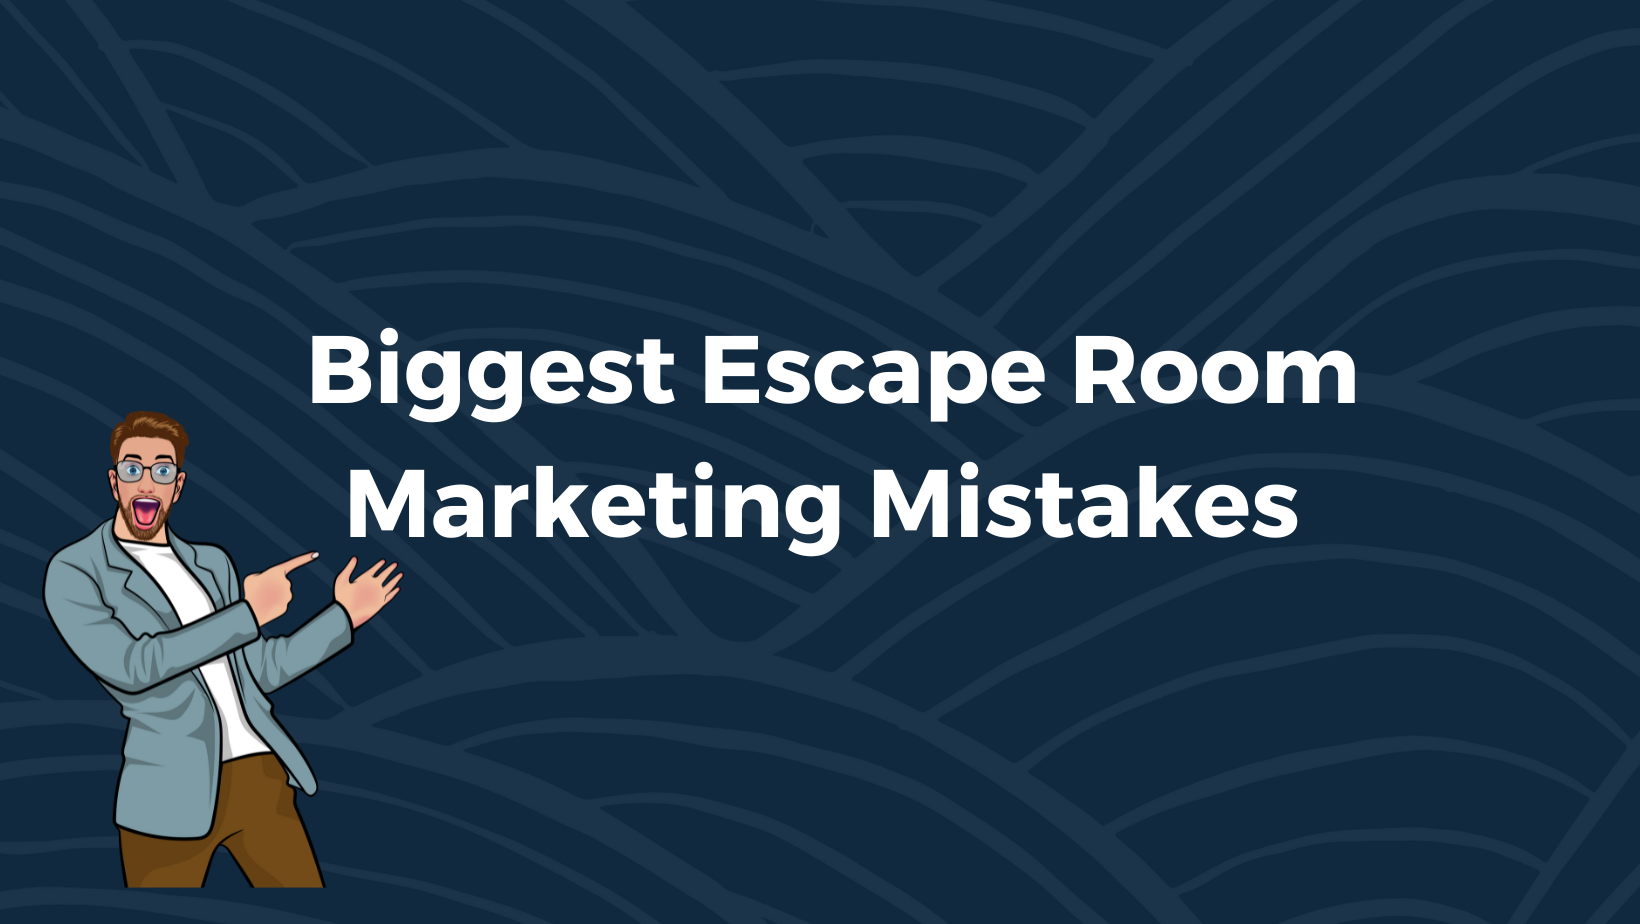 Biggest Escape Room Marketing Mistakes